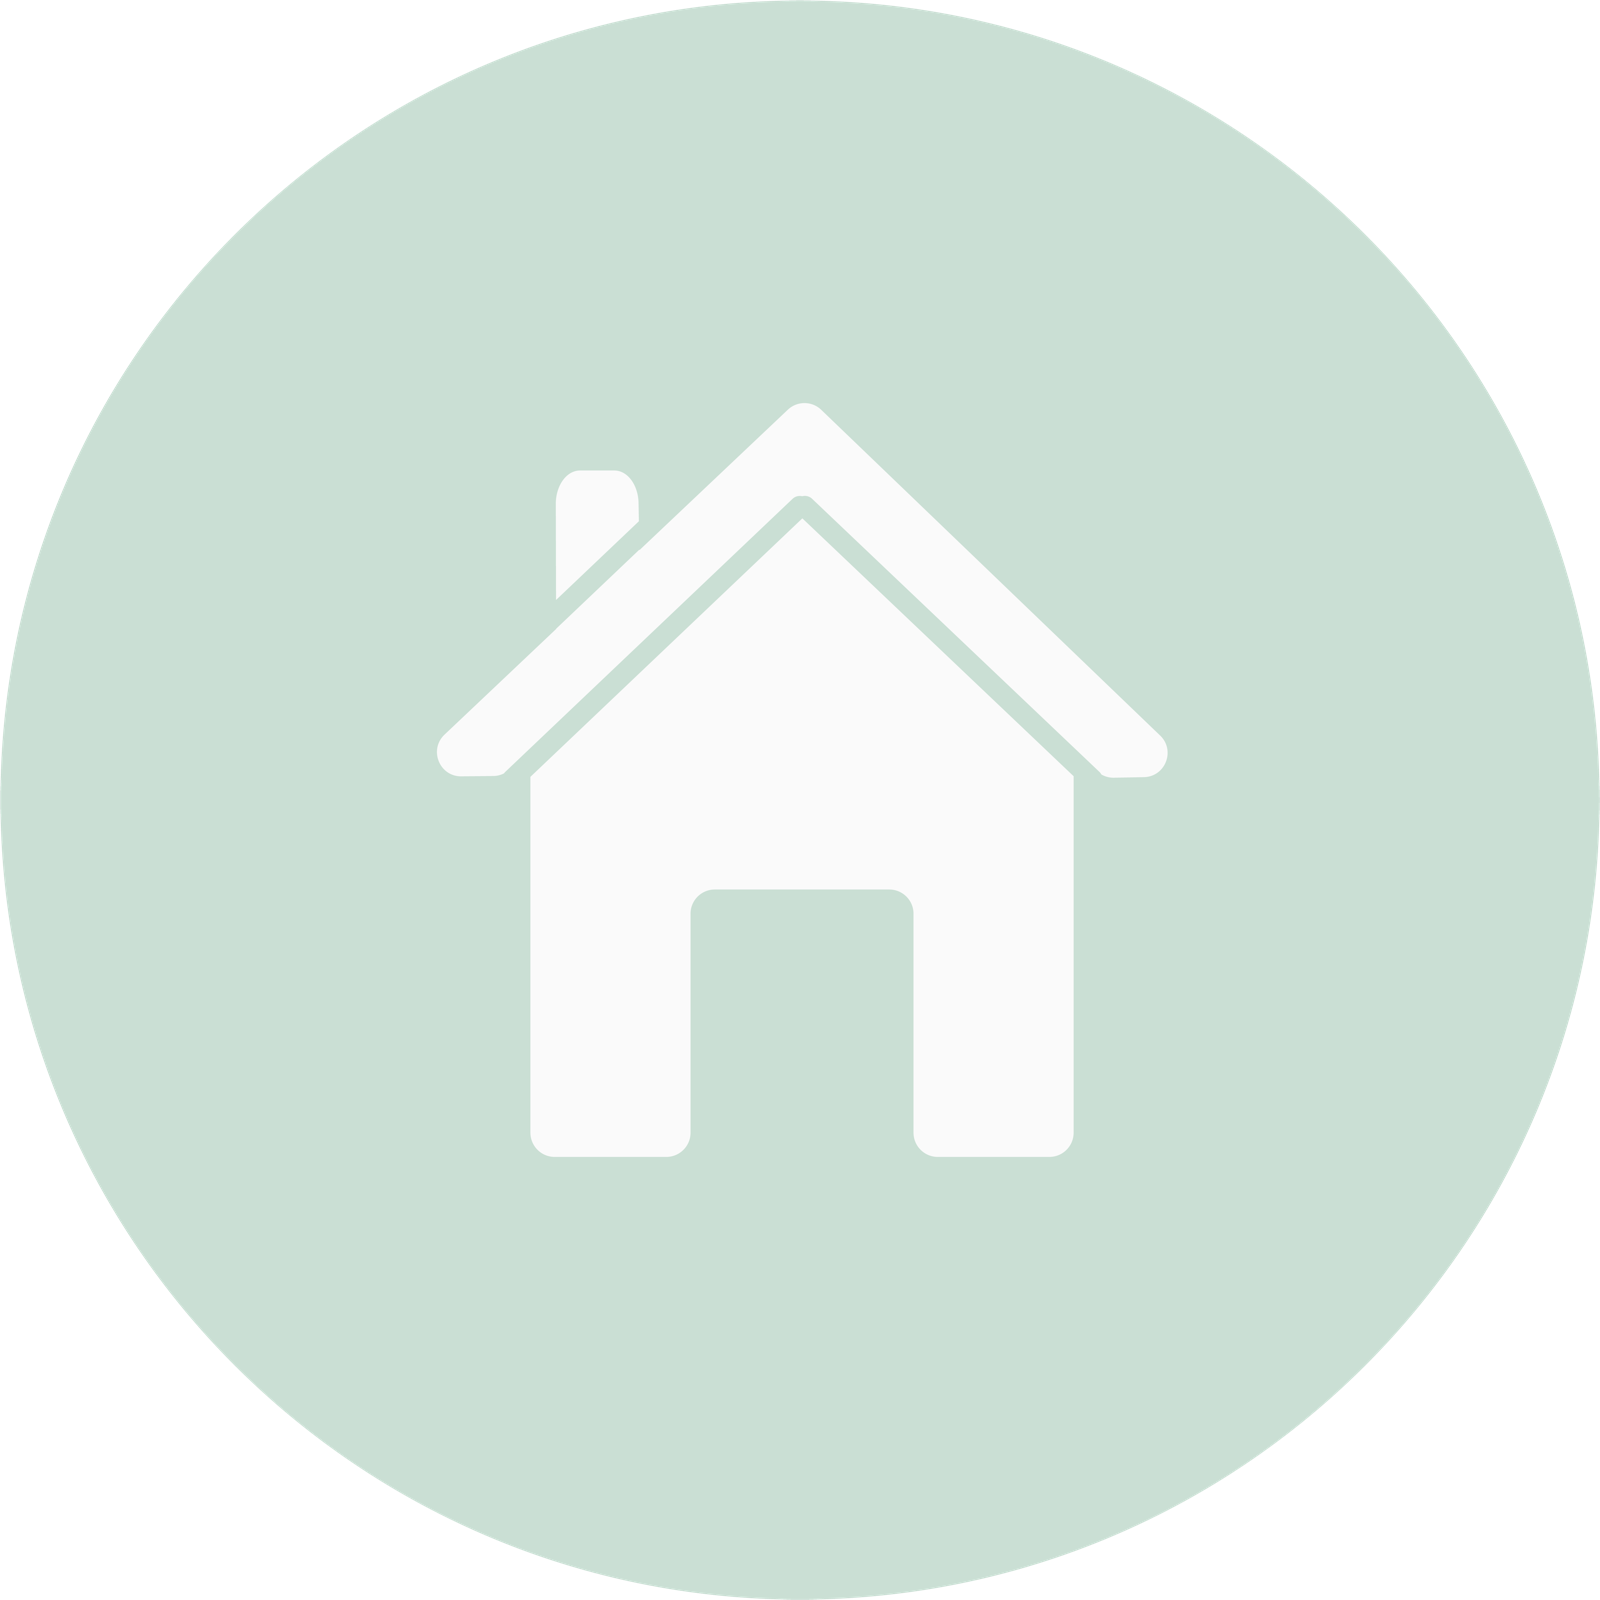 white icon of a house within a circle